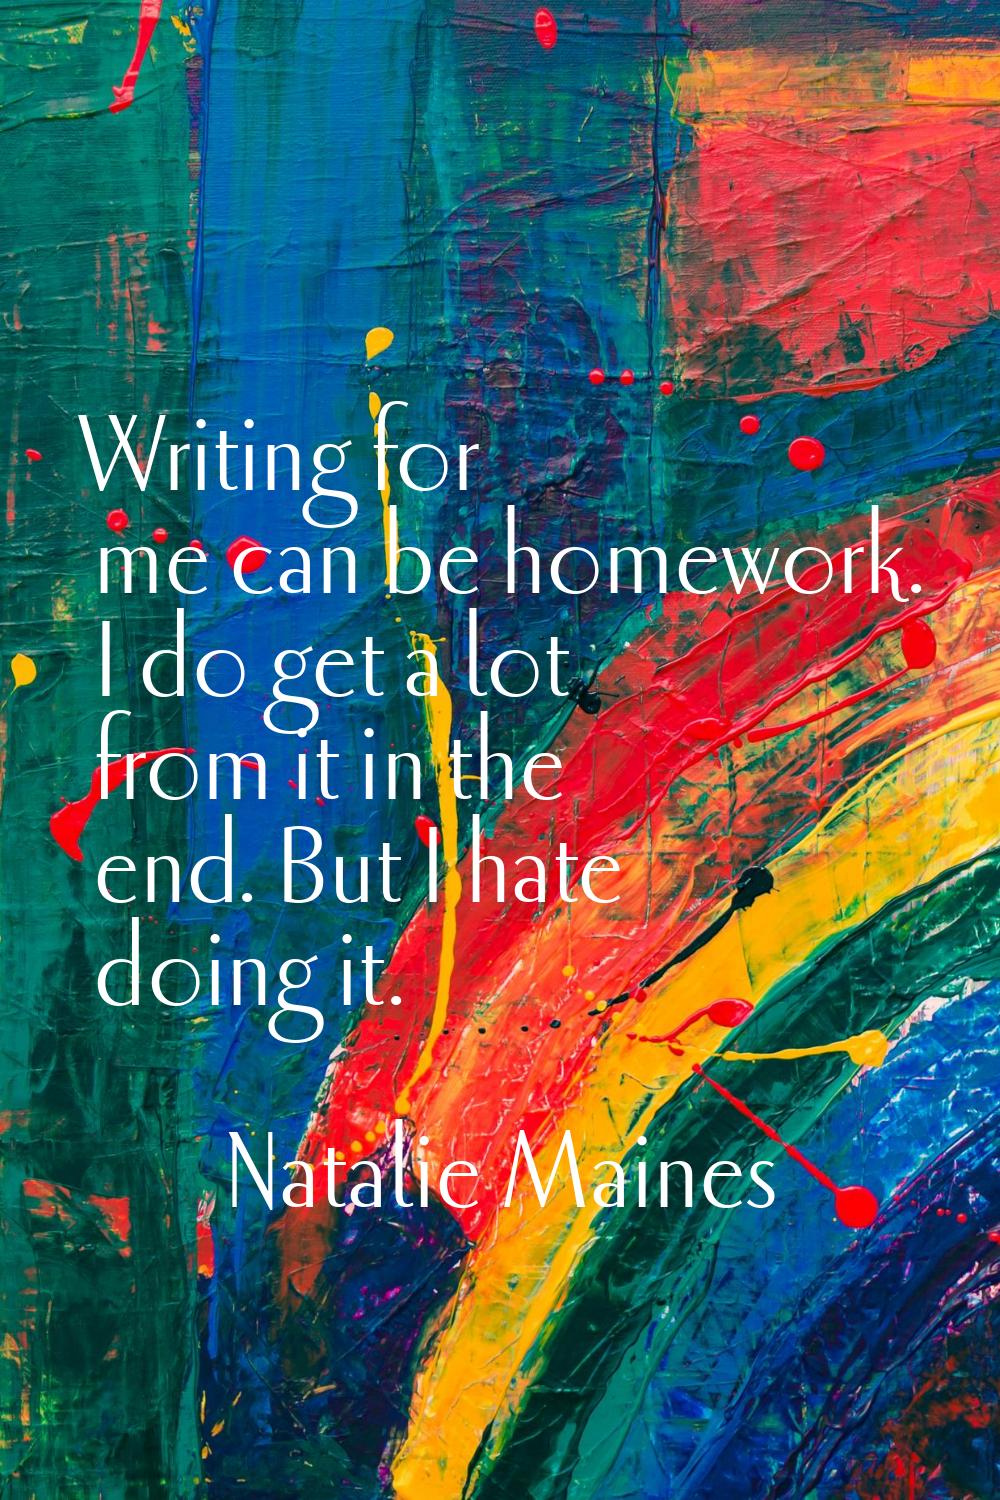 Writing for me can be homework. I do get a lot from it in the end. But I hate doing it.